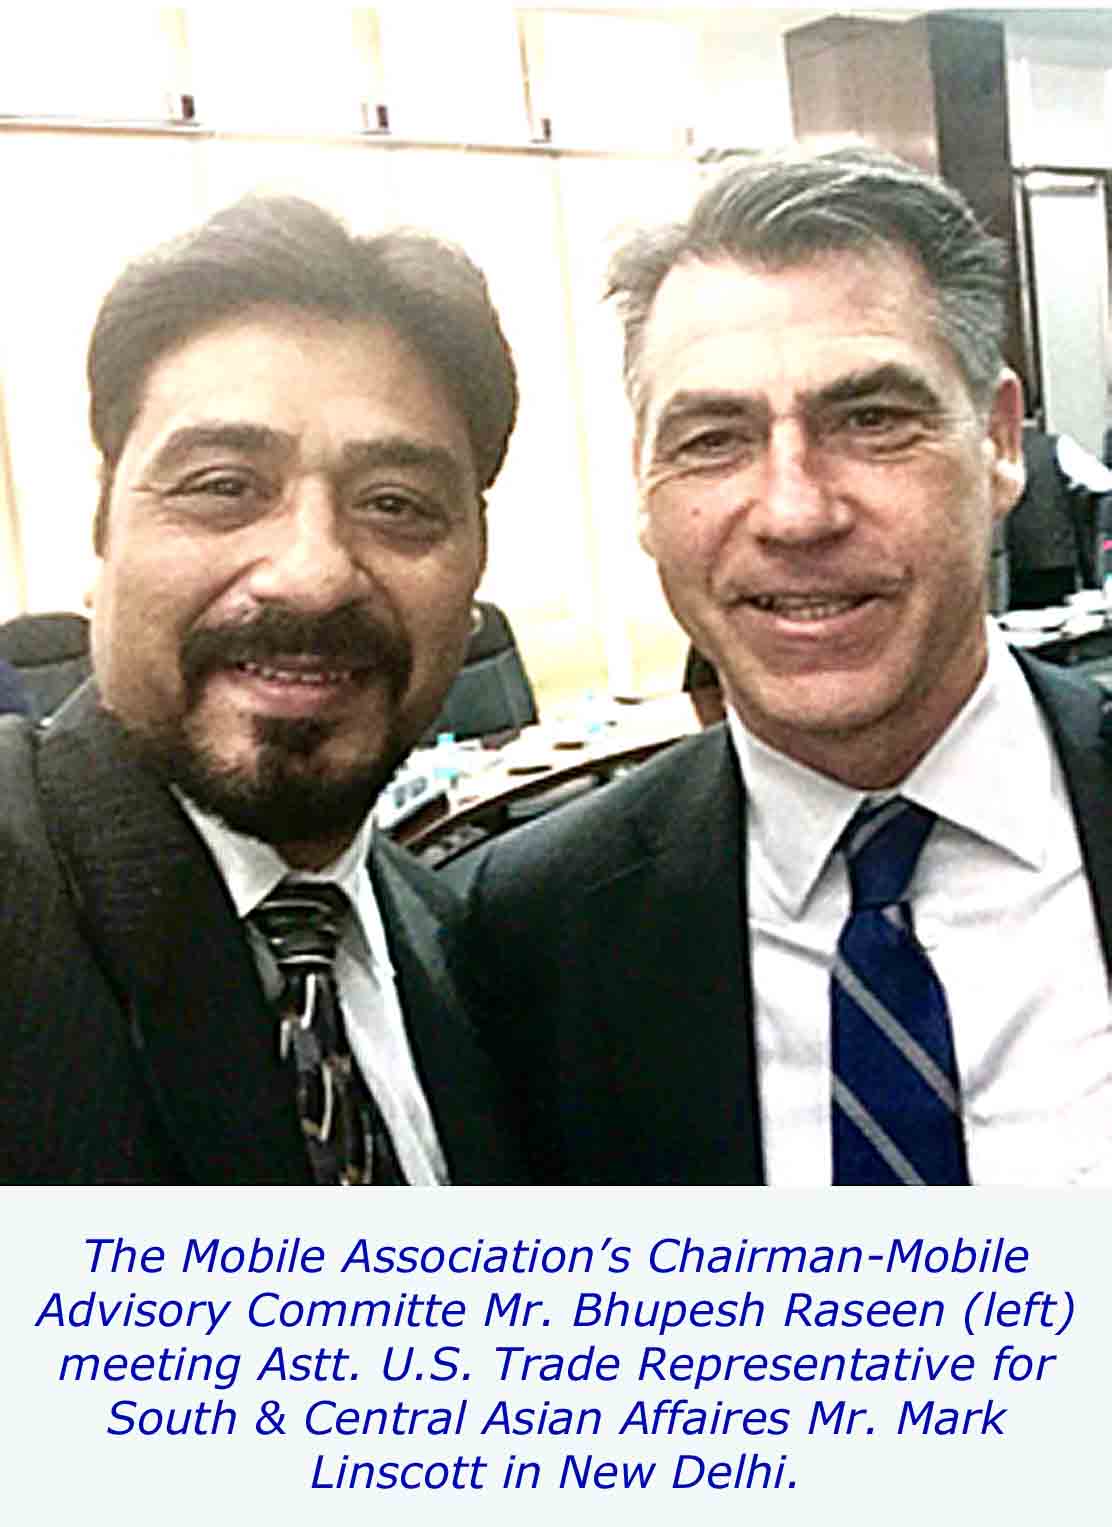 TMA News of The Mobile Association Meeting with the Astt. U.S. Trade Representative for South & Central Asian Affaires Mr. Mark Linscott